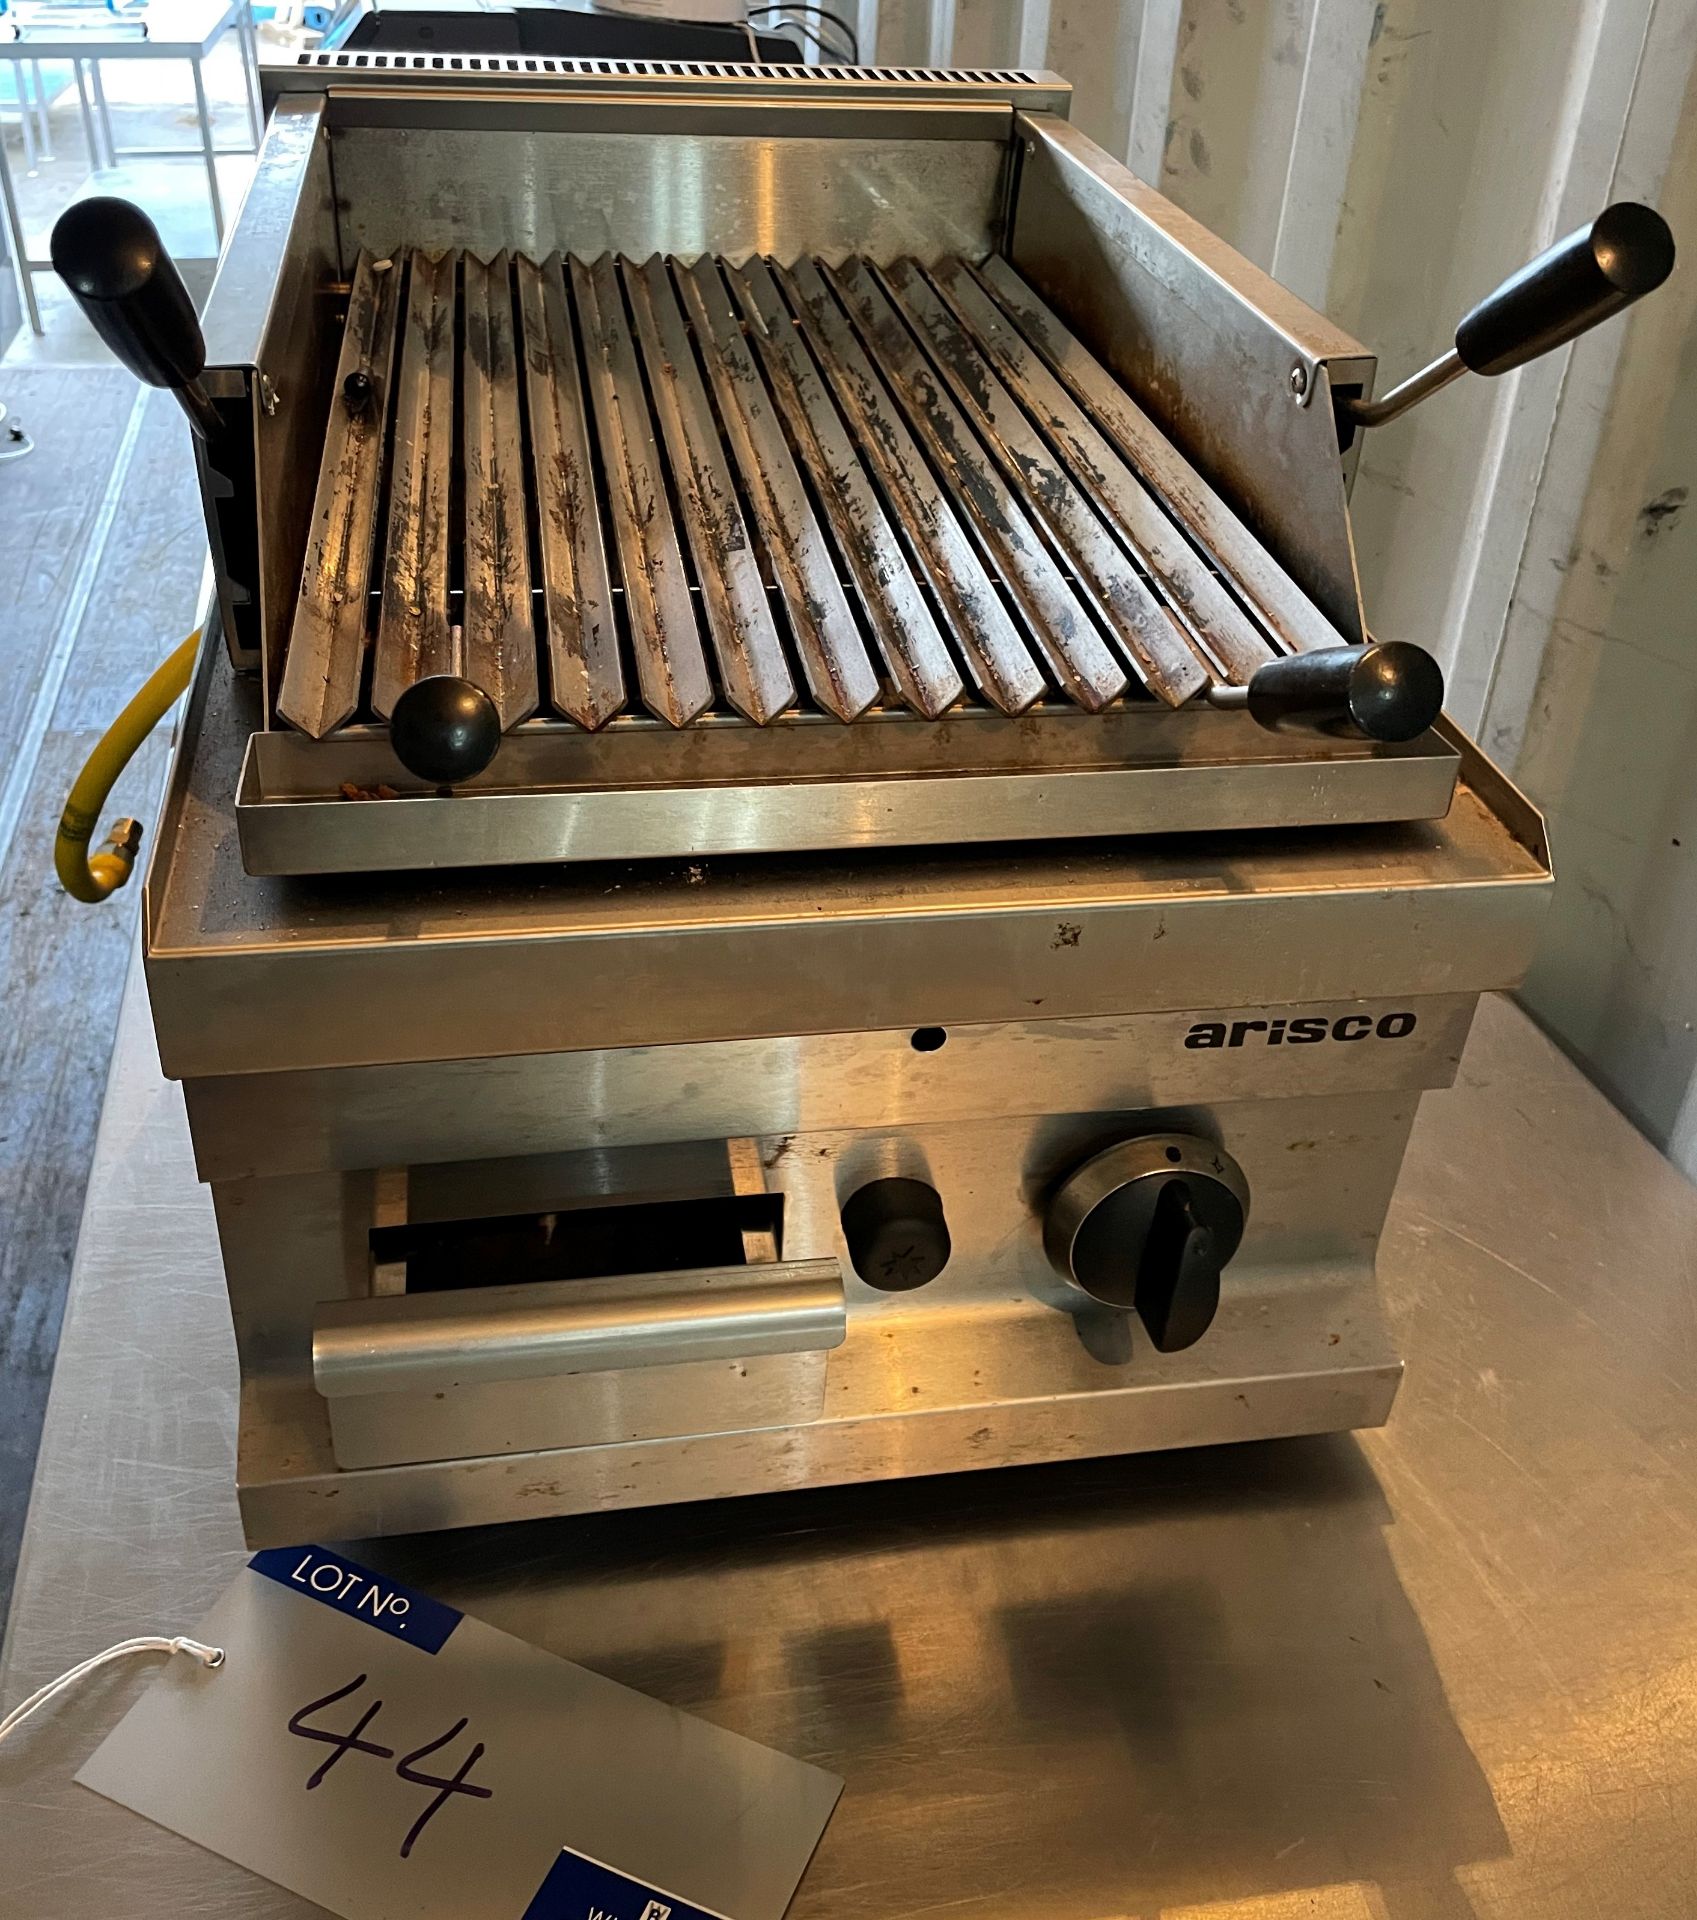 An Arisco GGL604 Gas Fired Bench Top Lavachar Grill, new 2021 (located at EMS Asset Management, Yard - Image 2 of 4